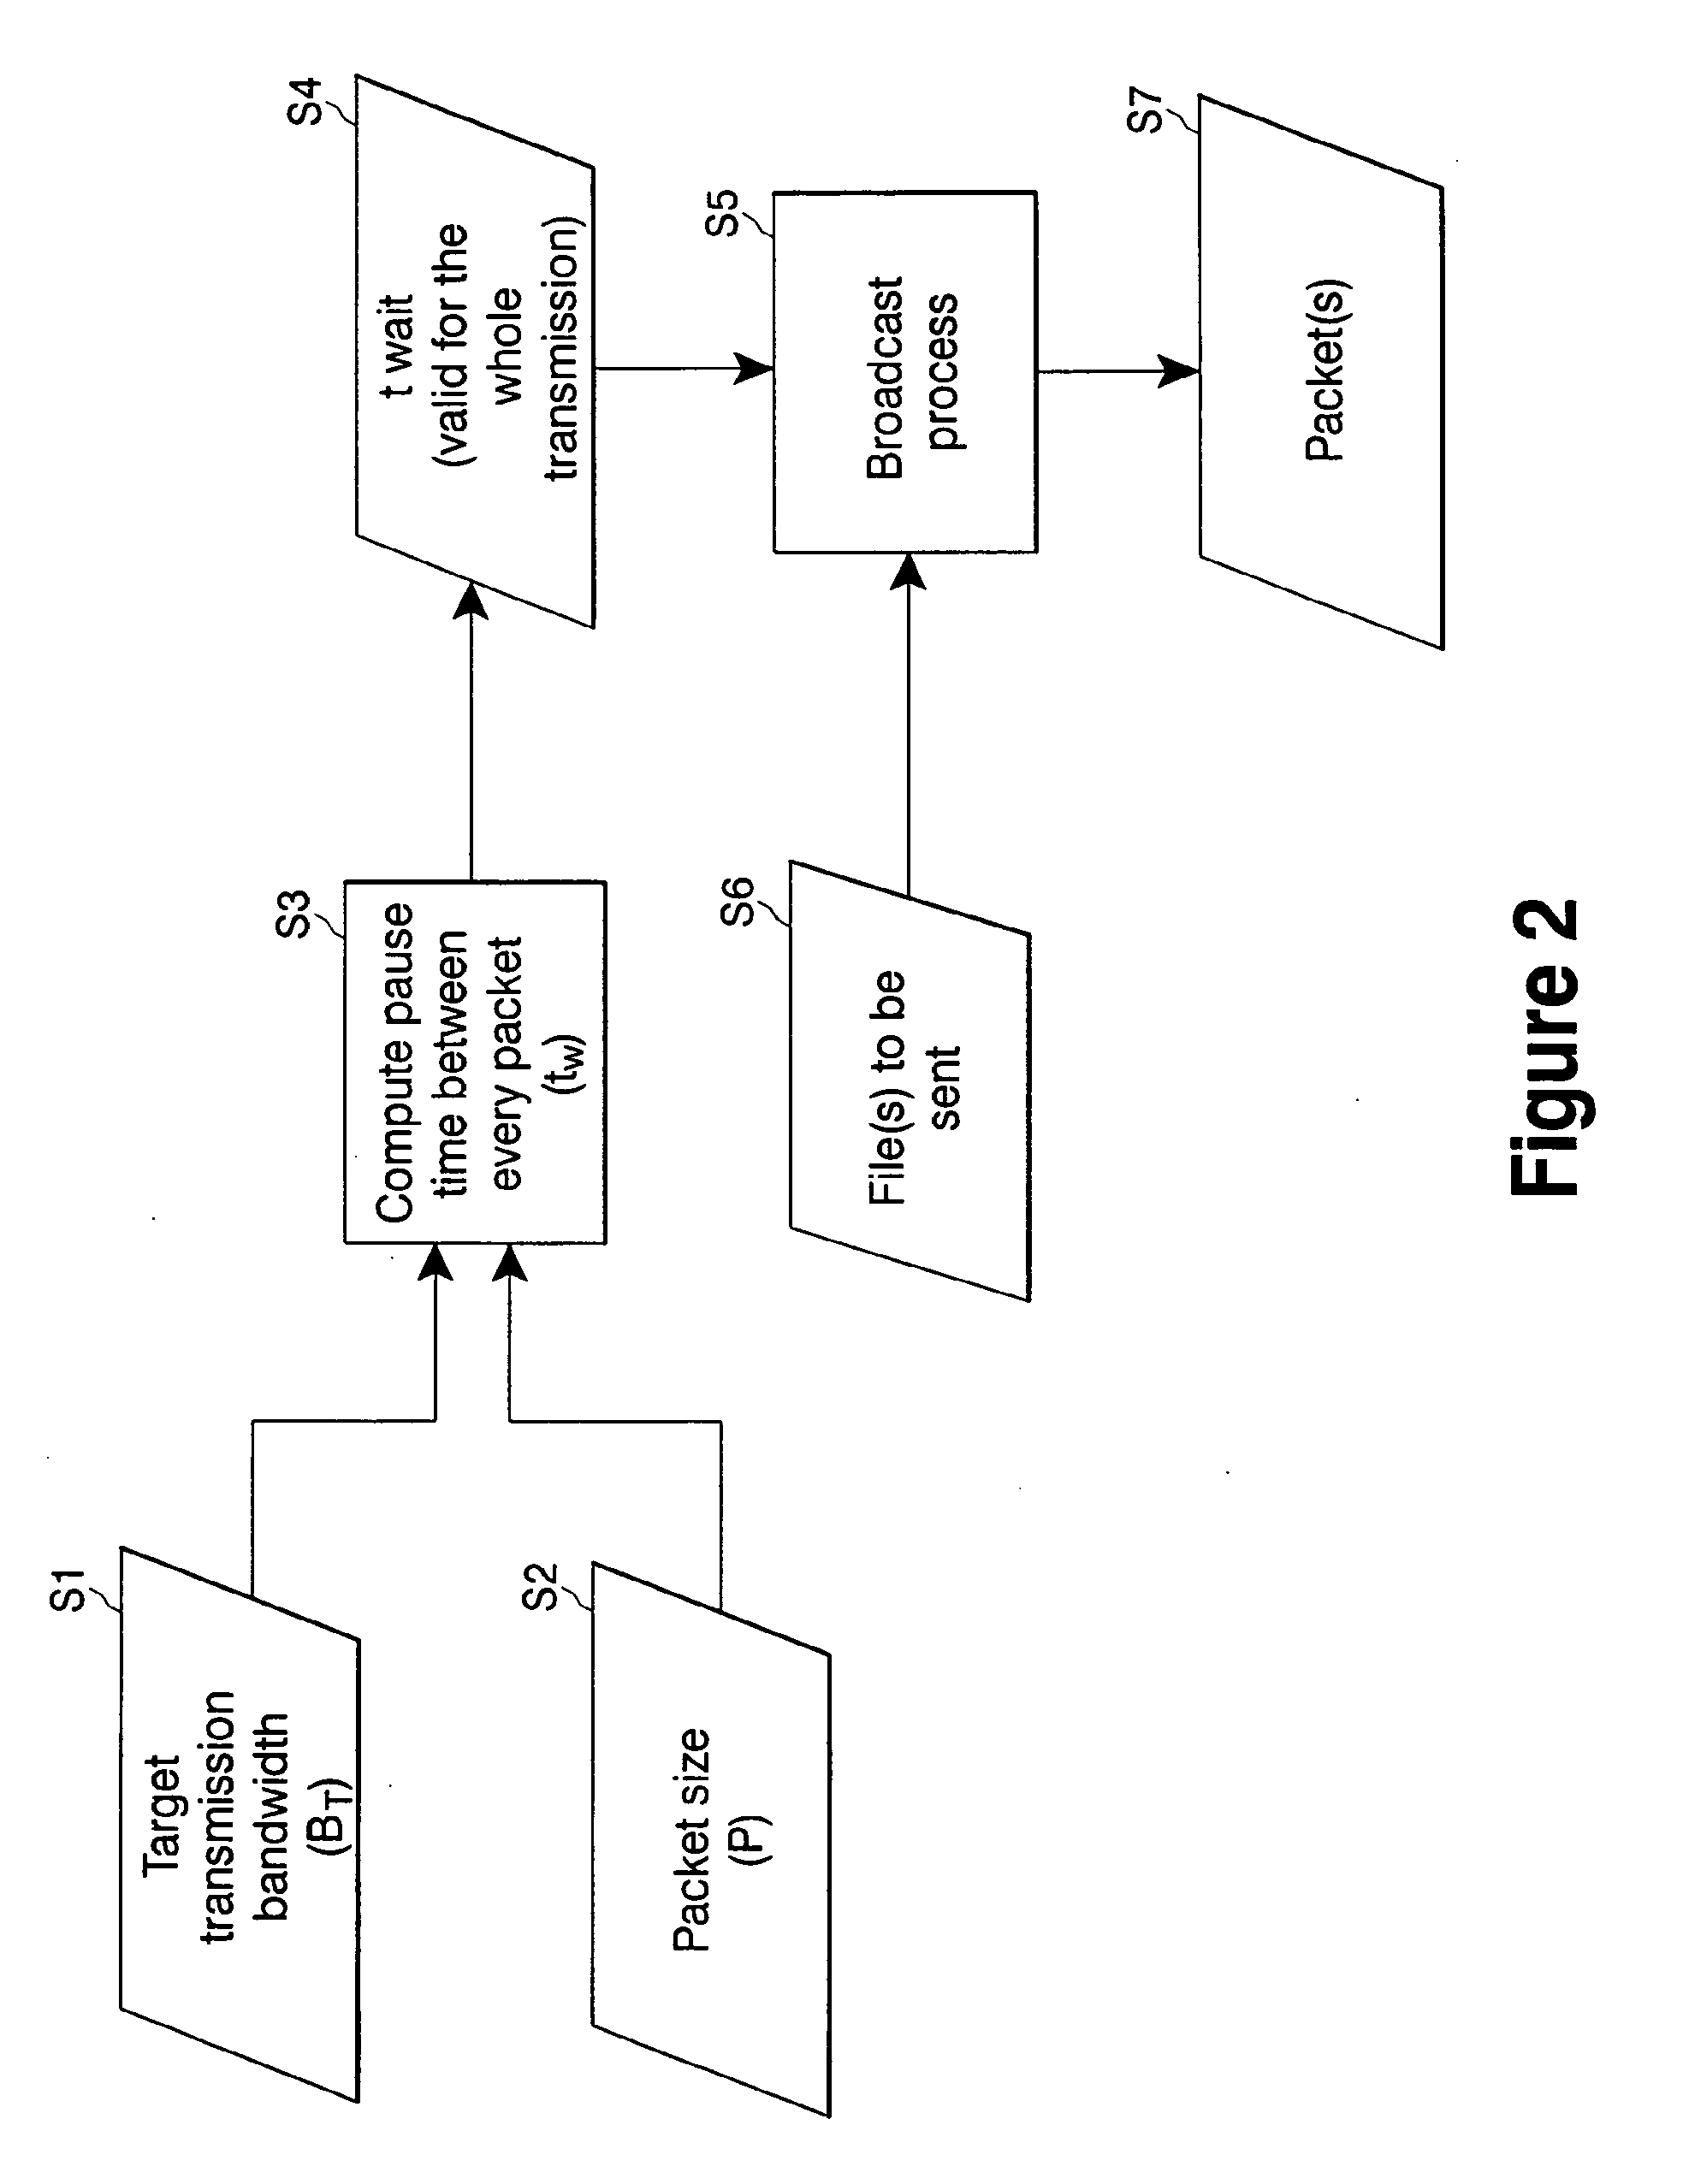 Method and system of data packet transmission timing for controlling bandwidth